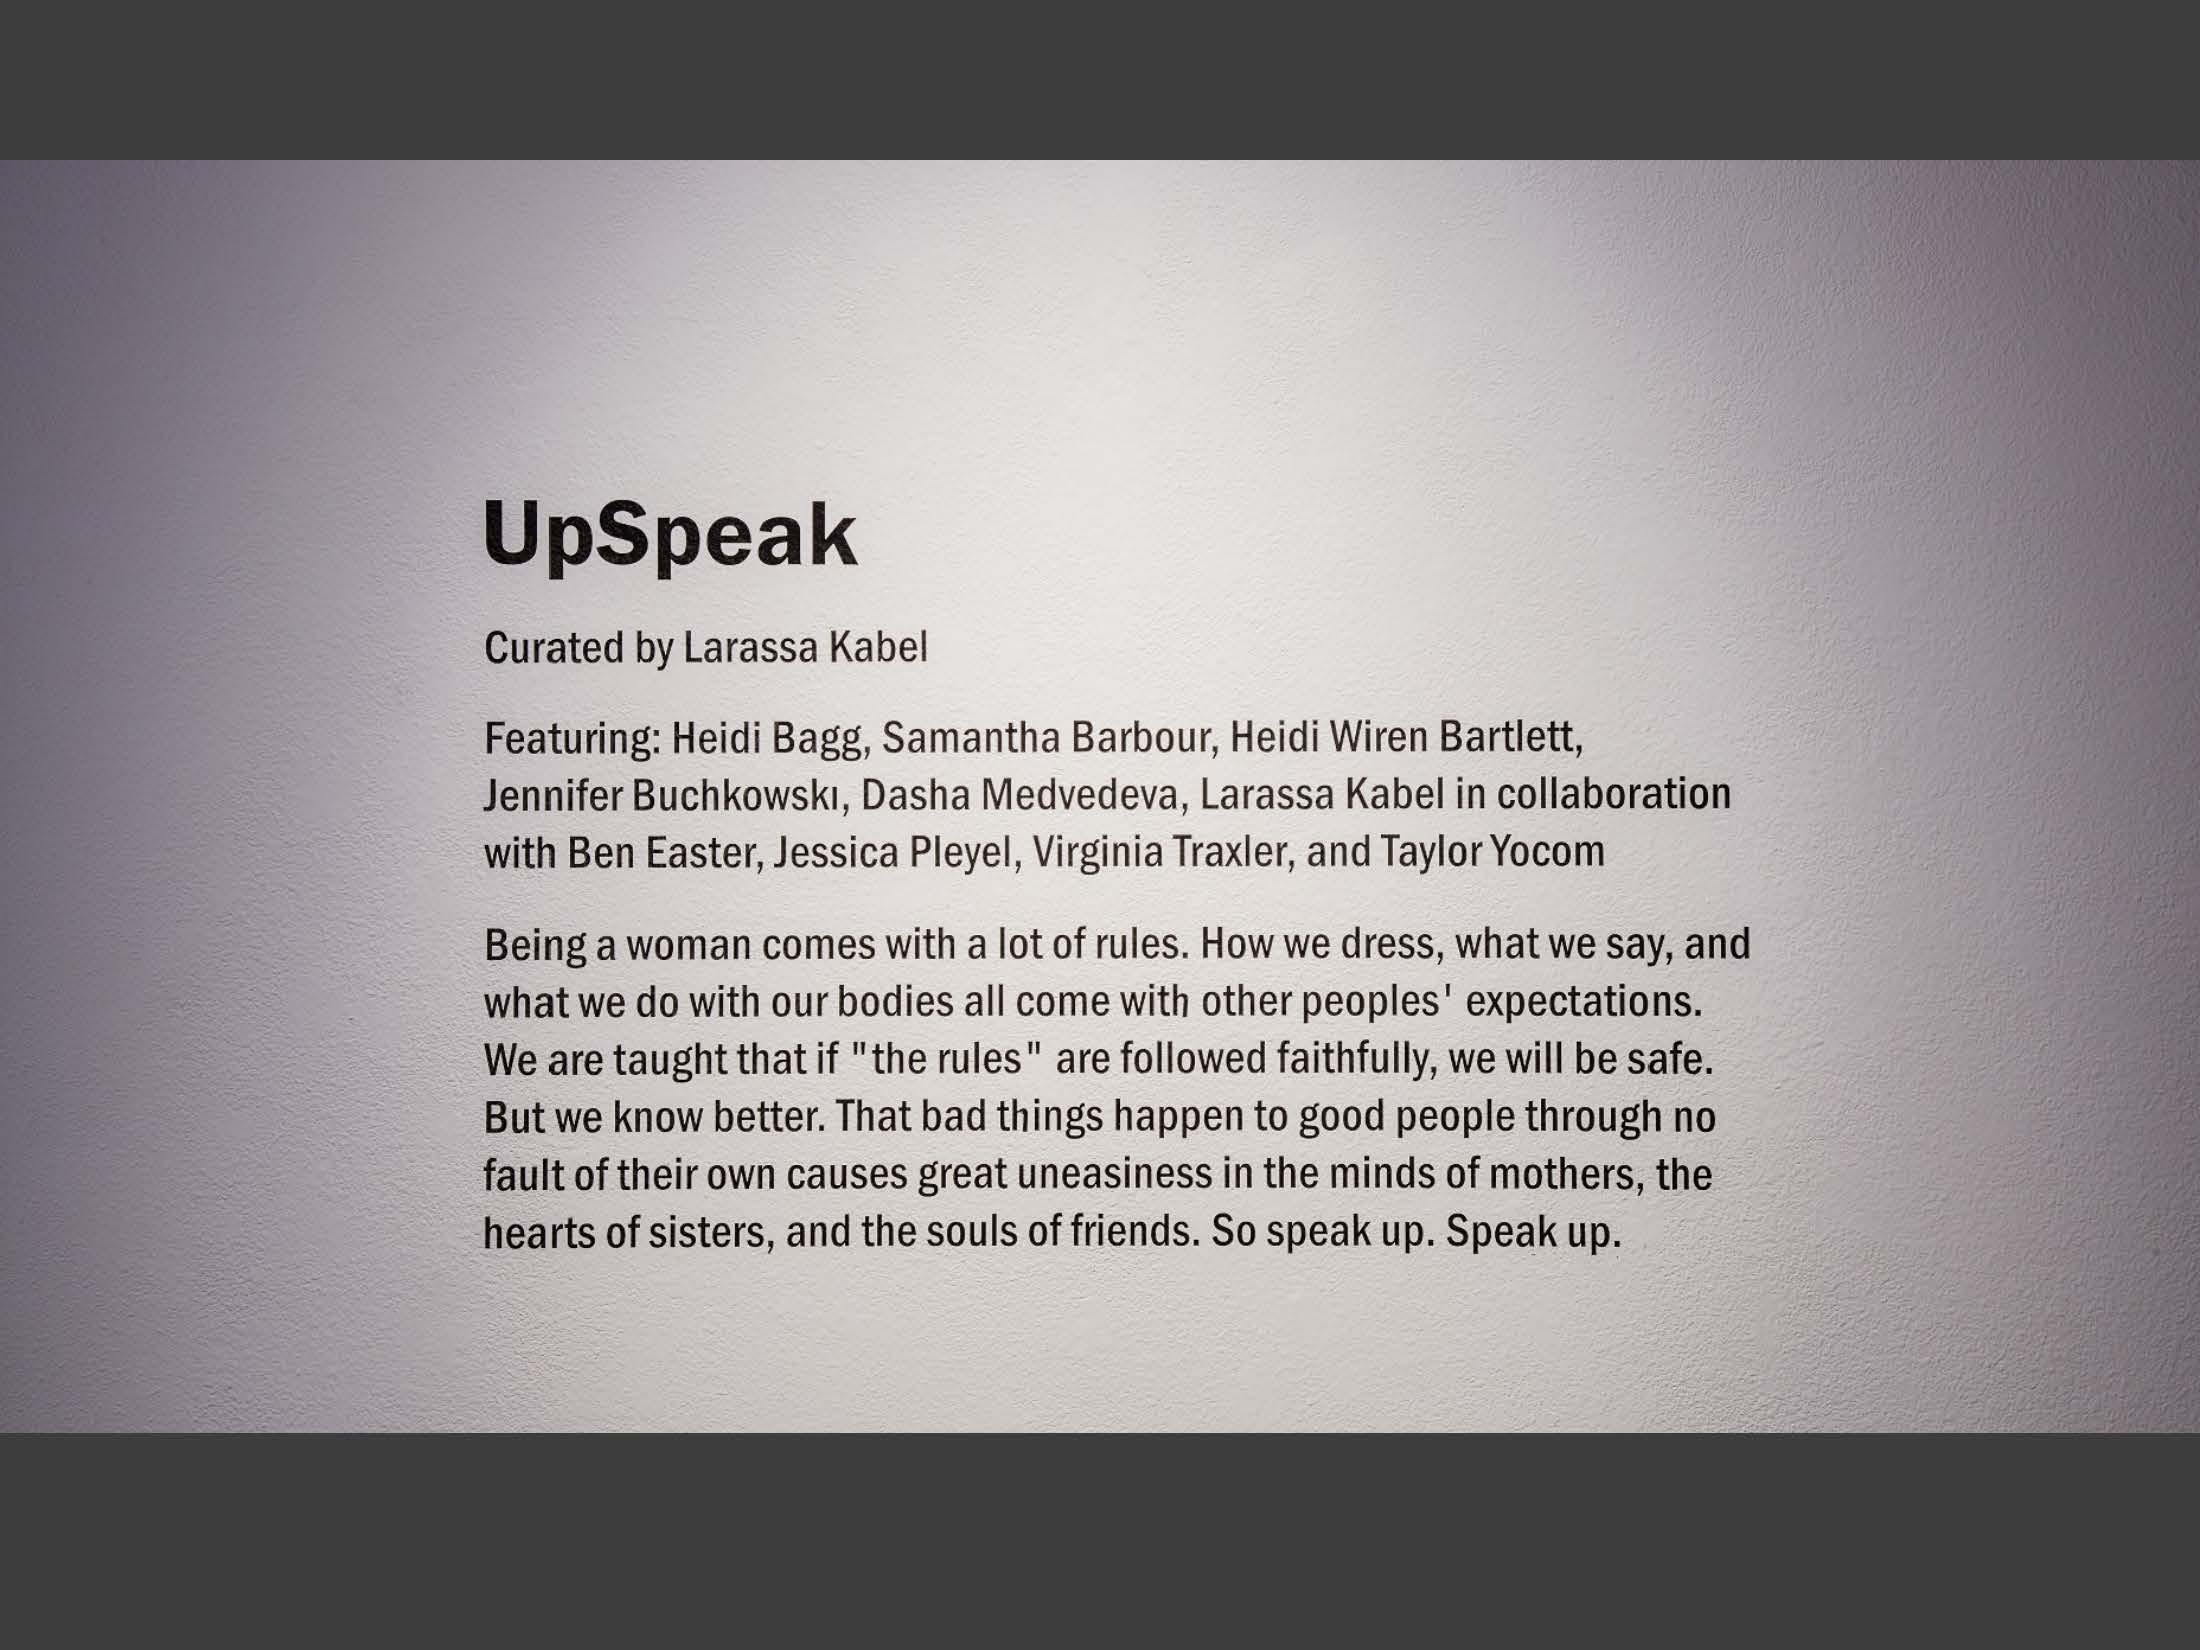 Artworks included in UpSpeak curated by Larassa Kabel